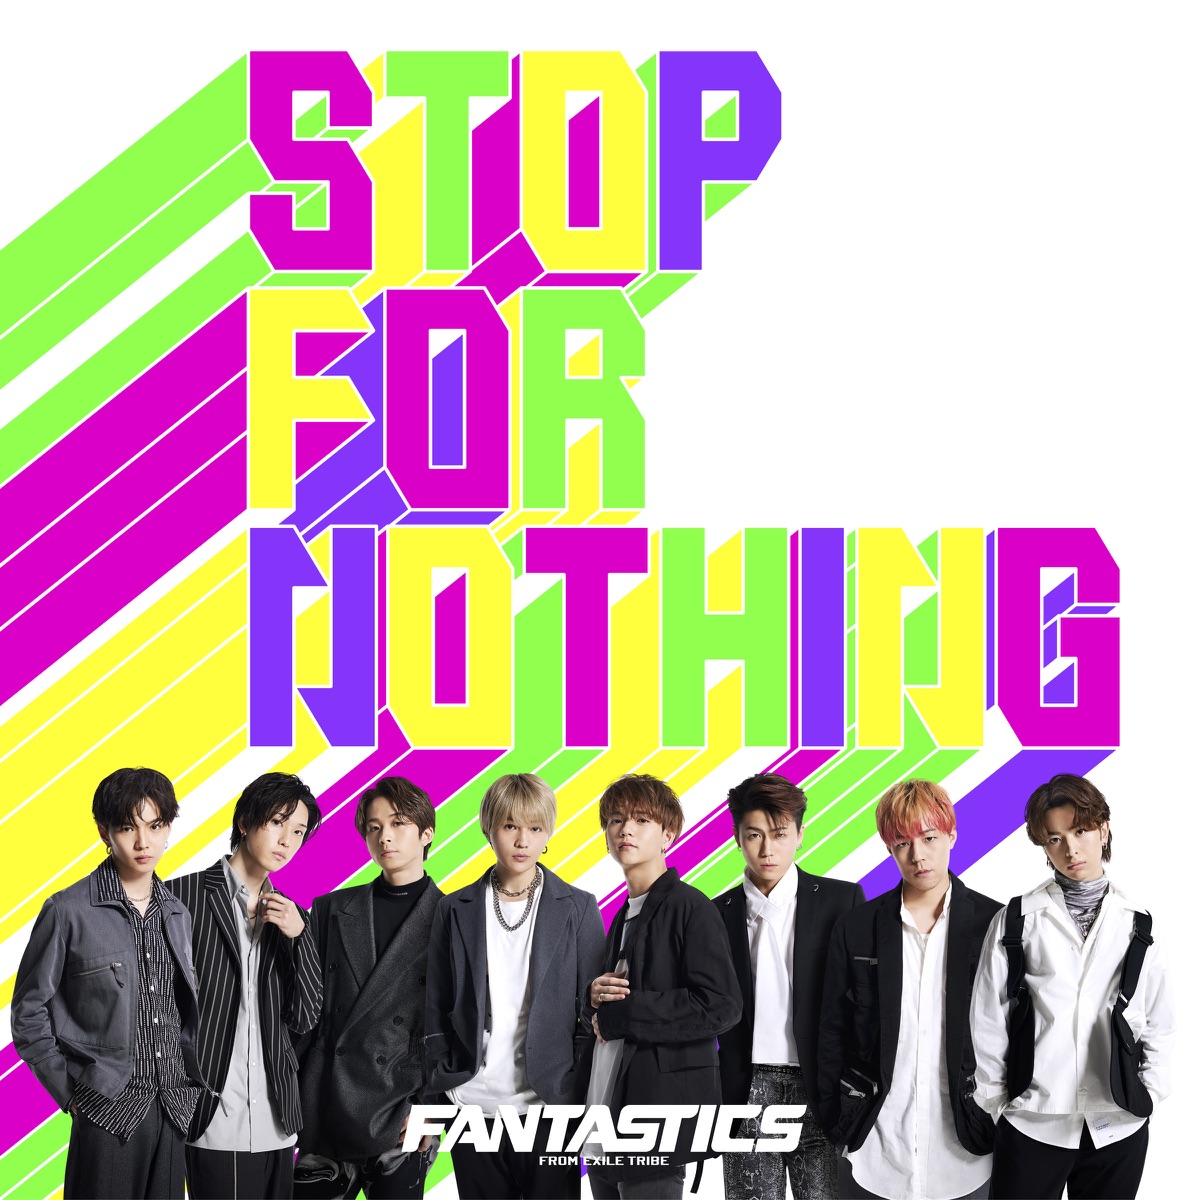 『FANTASTICS from EXILE TRIBE - WAY TO THE GLORY (FANTASTICS ver.) 歌詞』収録の『STOP FOR NOTHING』ジャケット